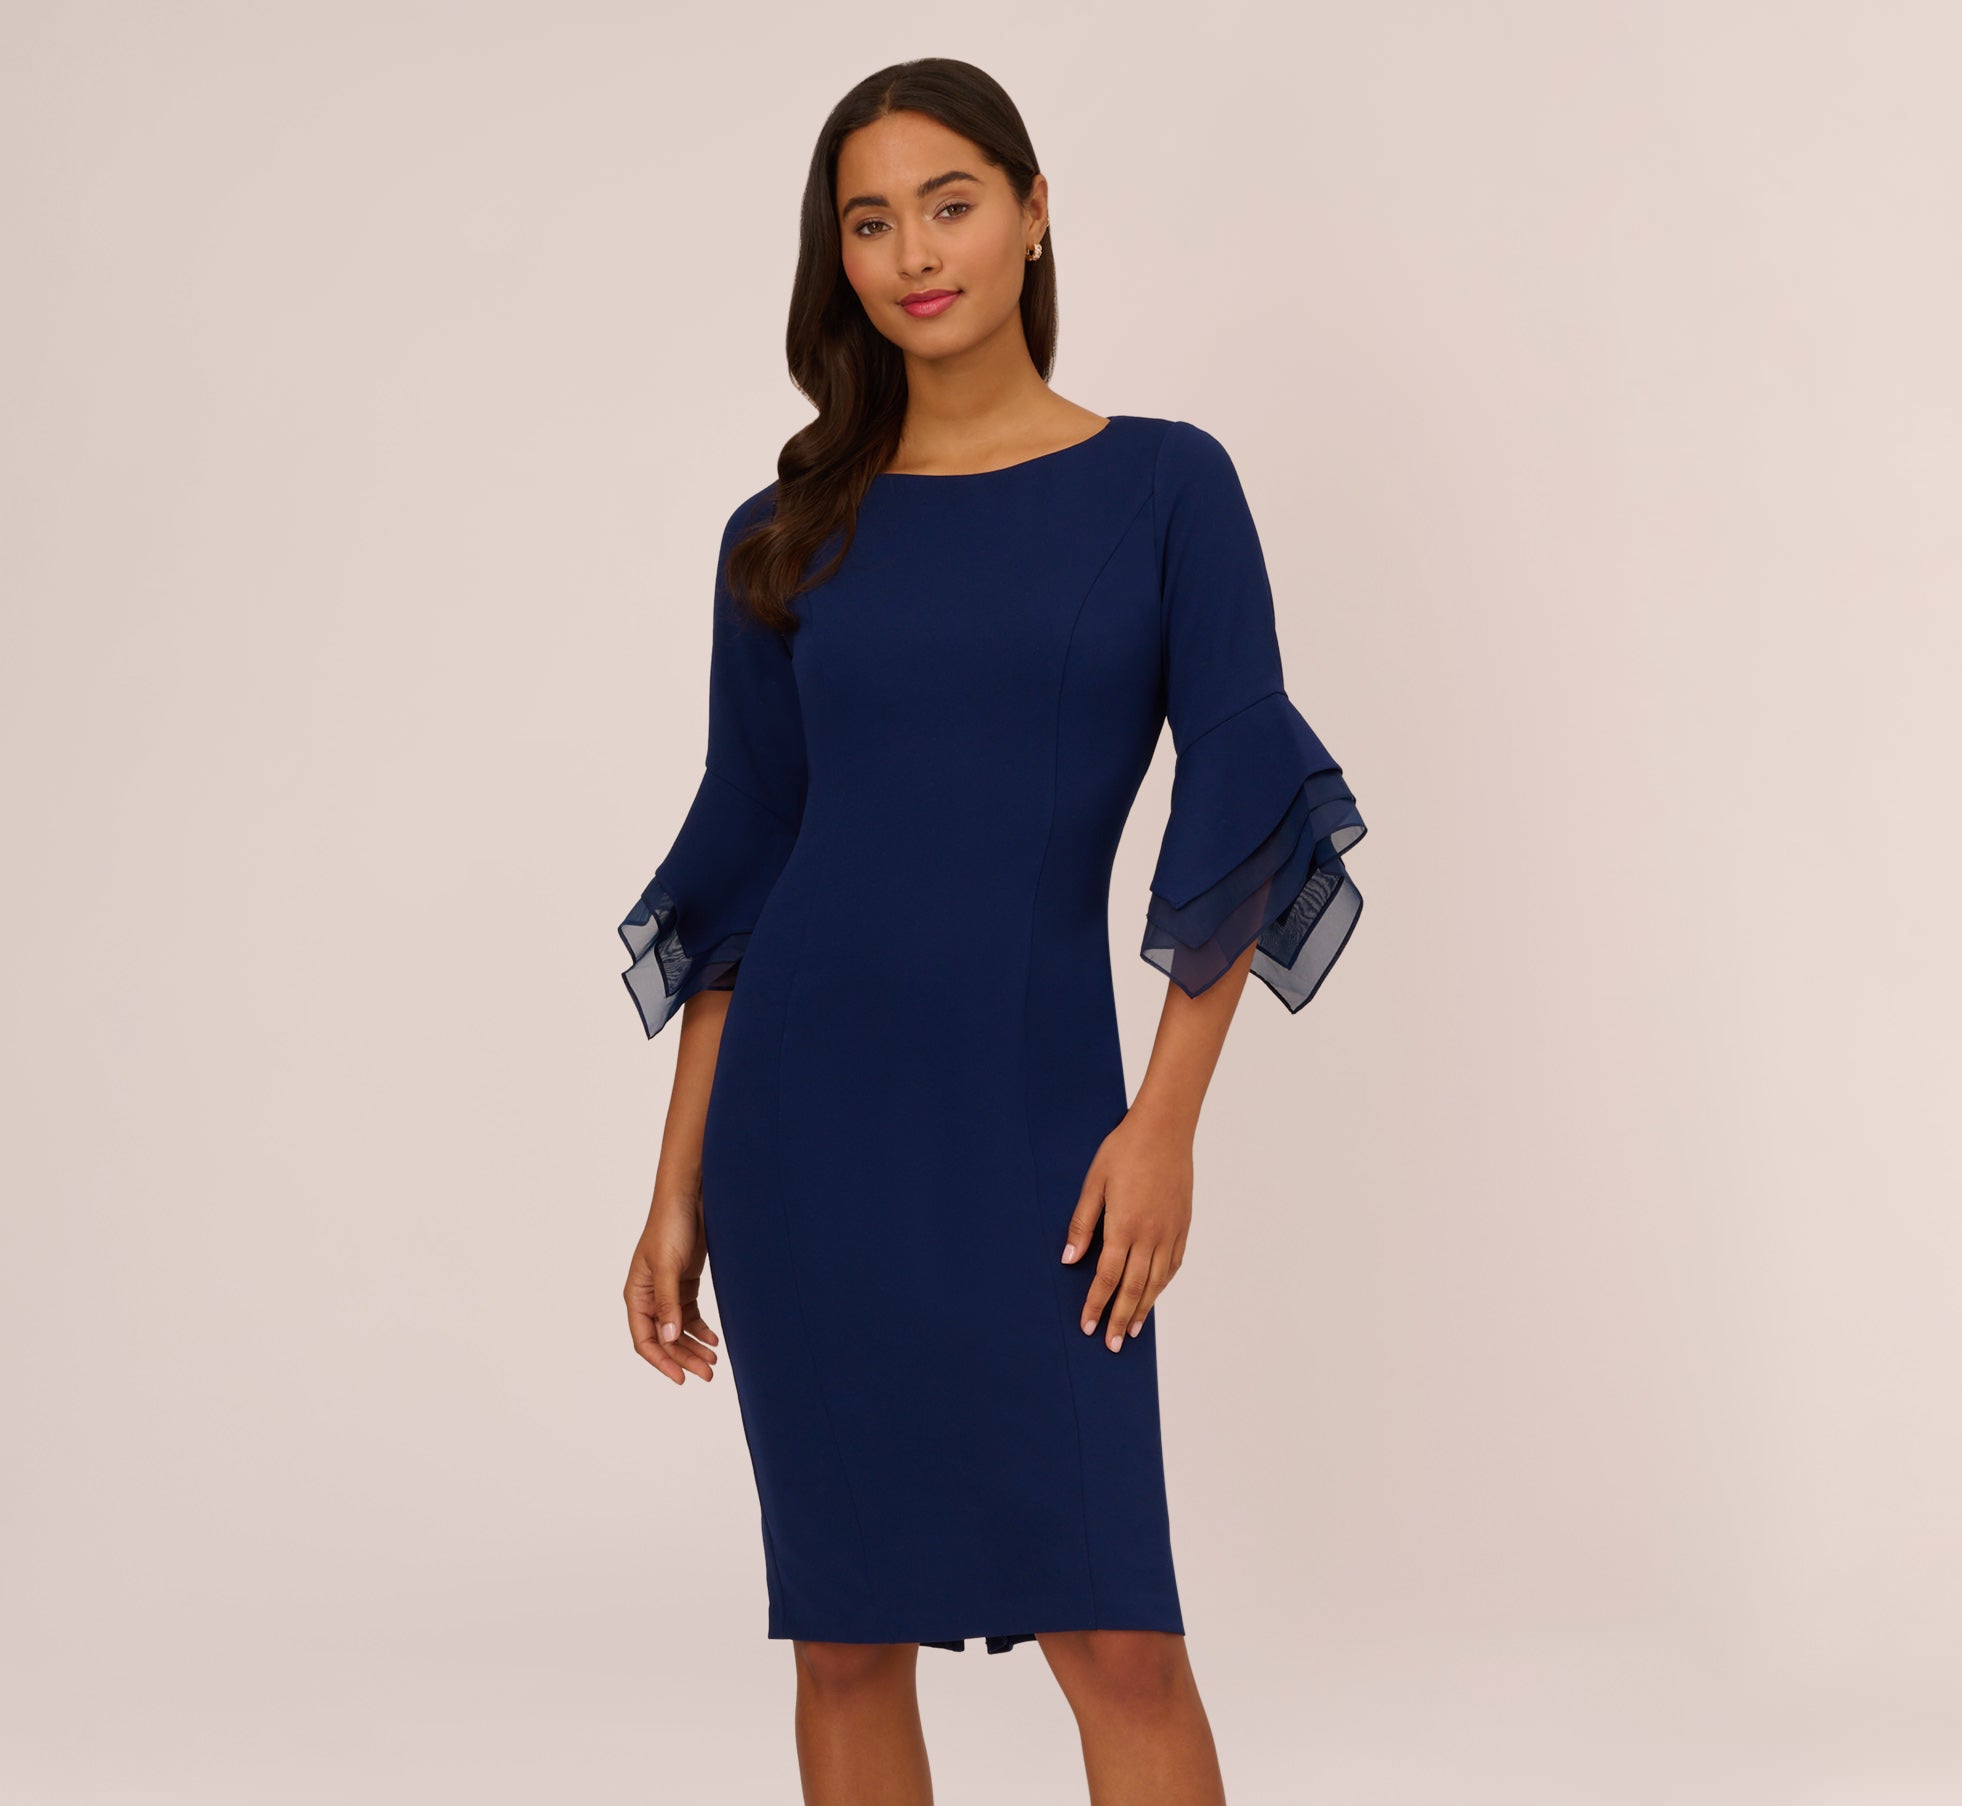 Knit Crepe Sheath Dress With Tiered Three Quarter Sleeves In Navy Sateen -  Navy Sateen / Regular / 4